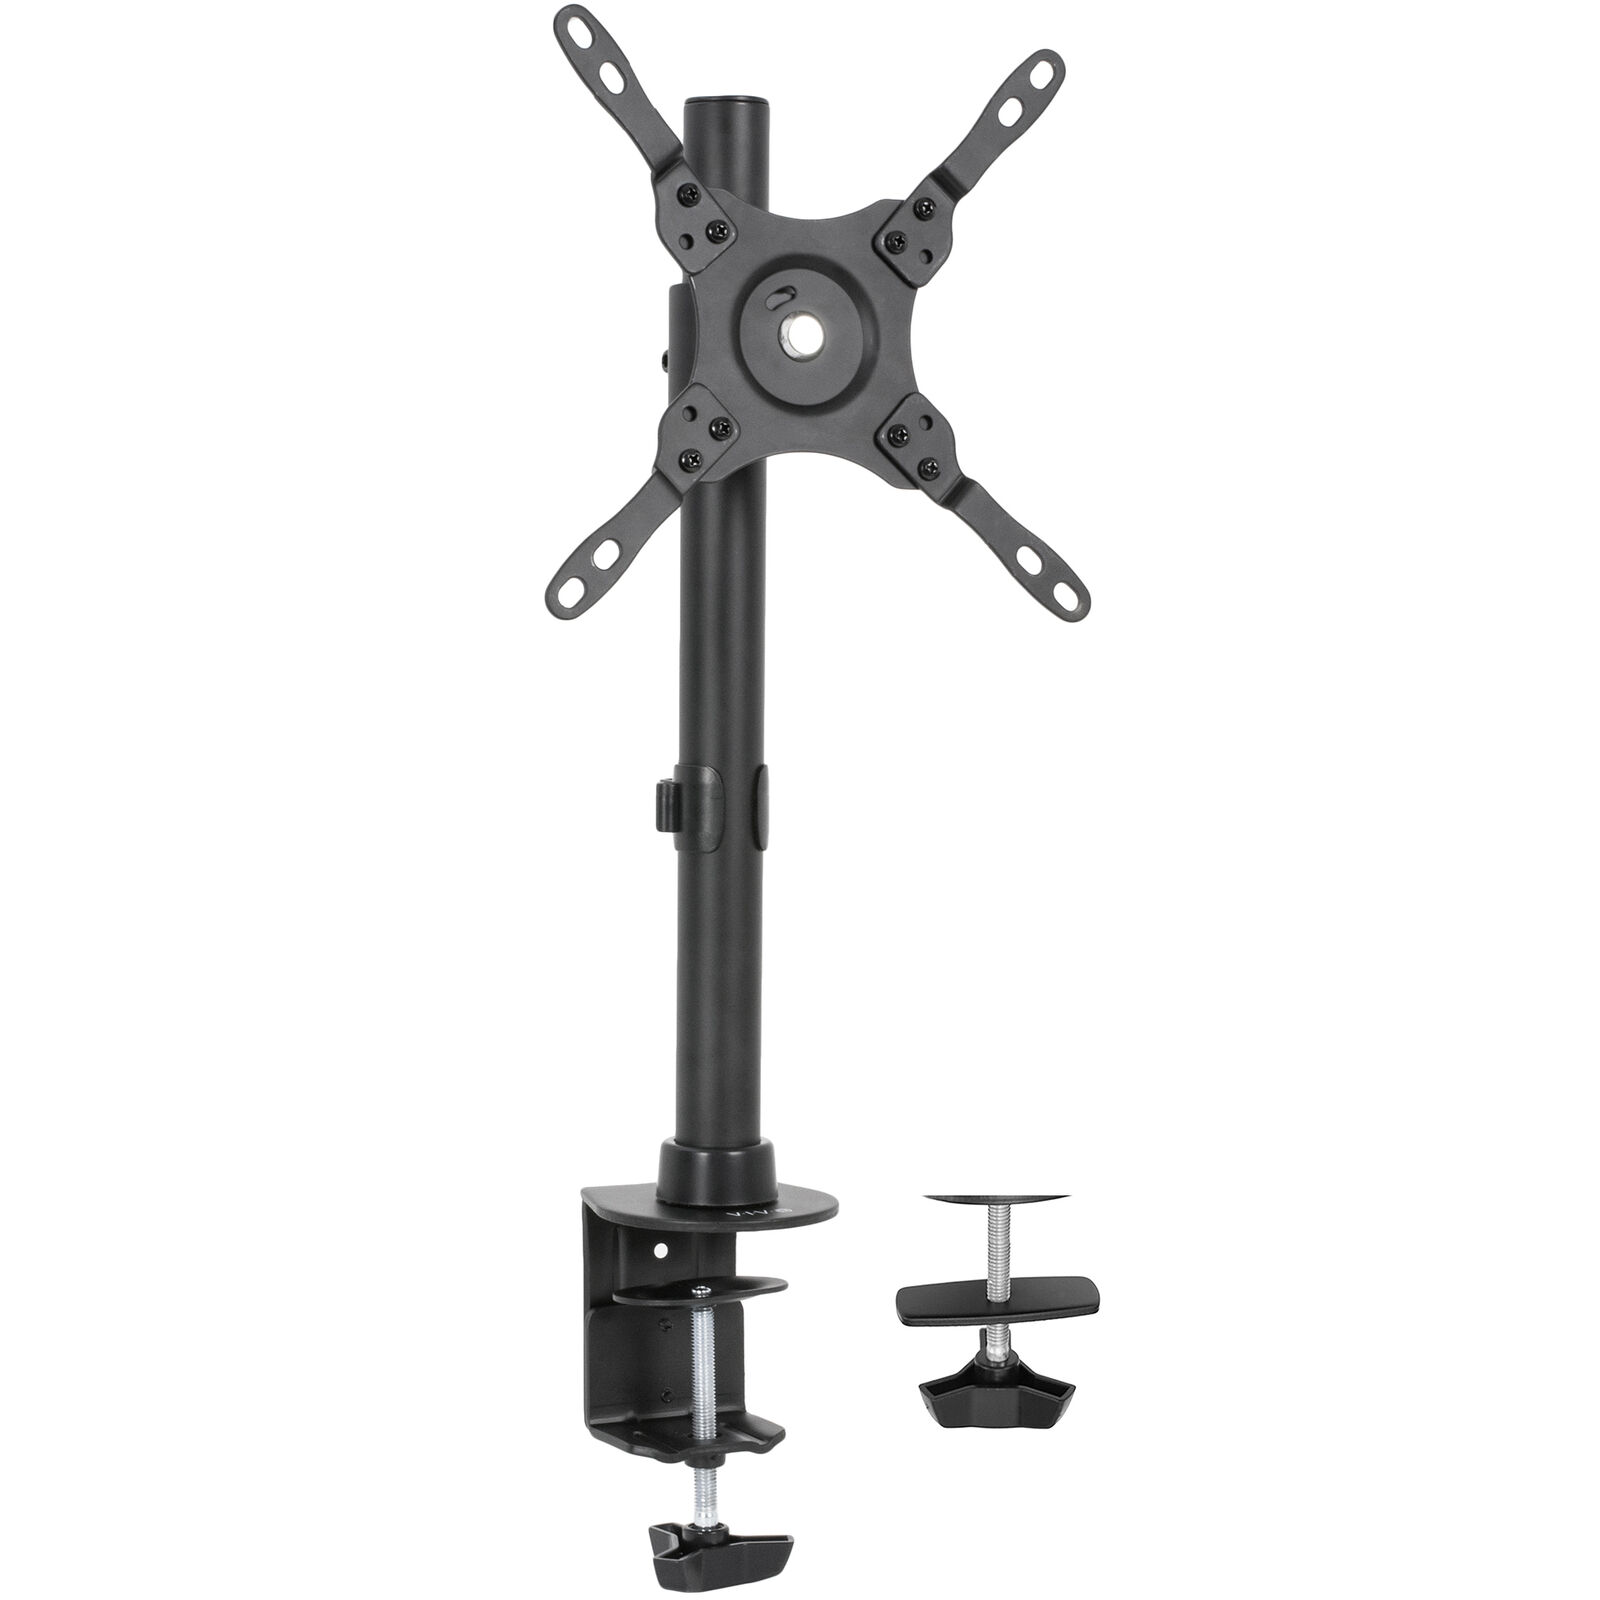 VIVO Black TV & Ultra Wide Screen Monitor Desk Mount Stand for Screens up to 42